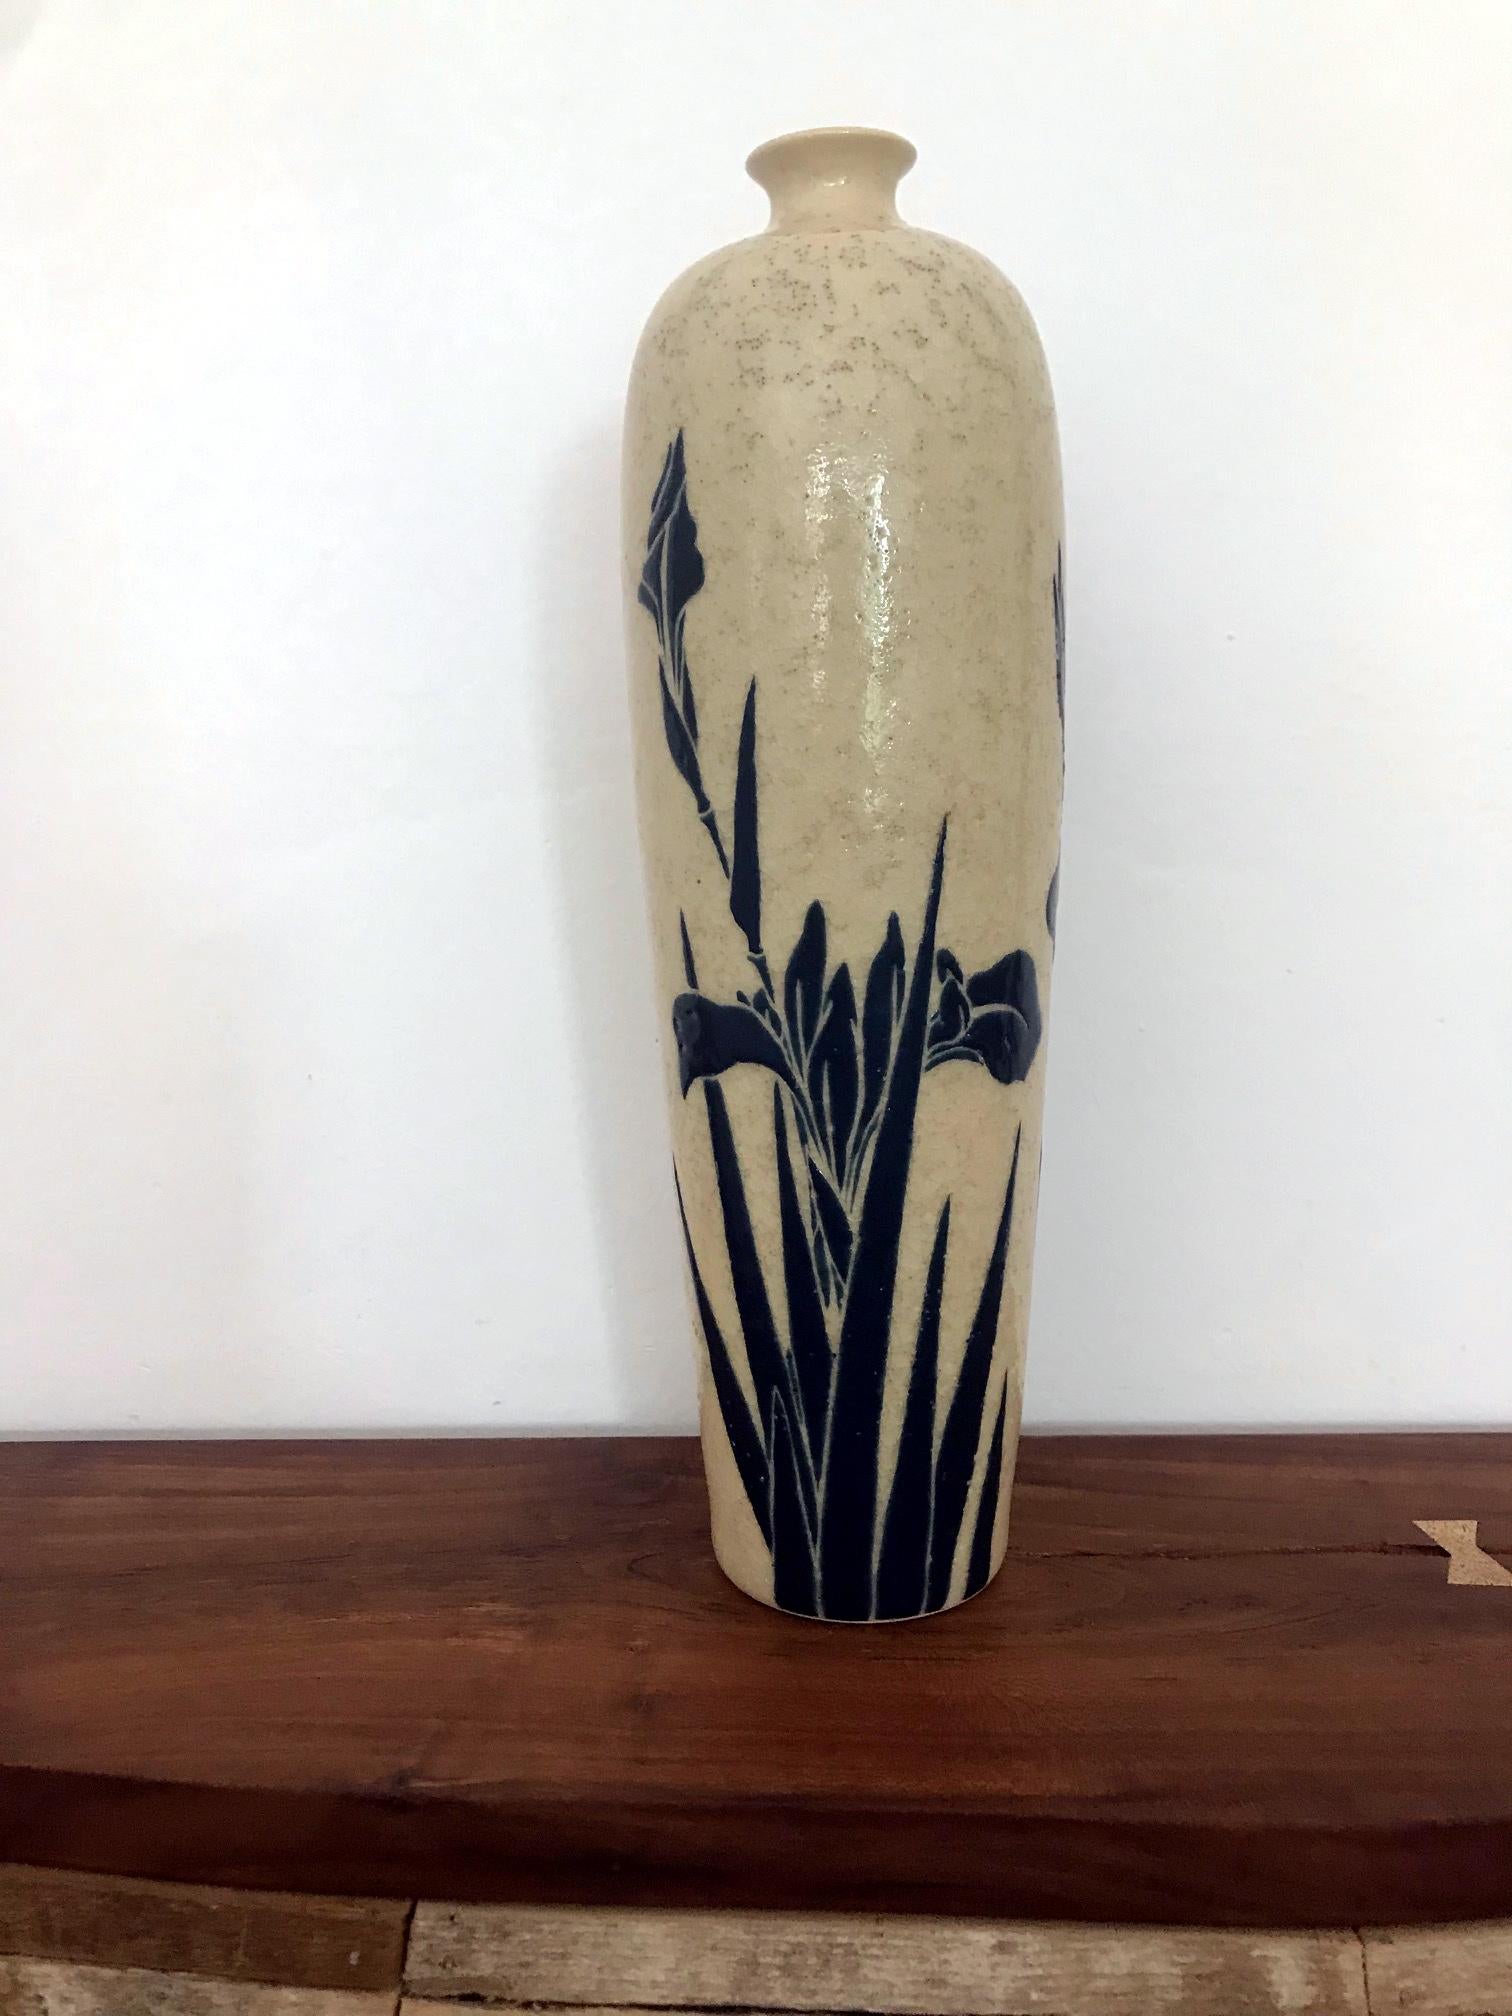 An elegant vase made in Kyoto, Japan, circa 1920s. With a graceful elongated Mei-Ping form, it was likely used as a flower holder during the tea ceremony. The stoneware body has an incised and raised design of Irises in an over glazed indigo blue,